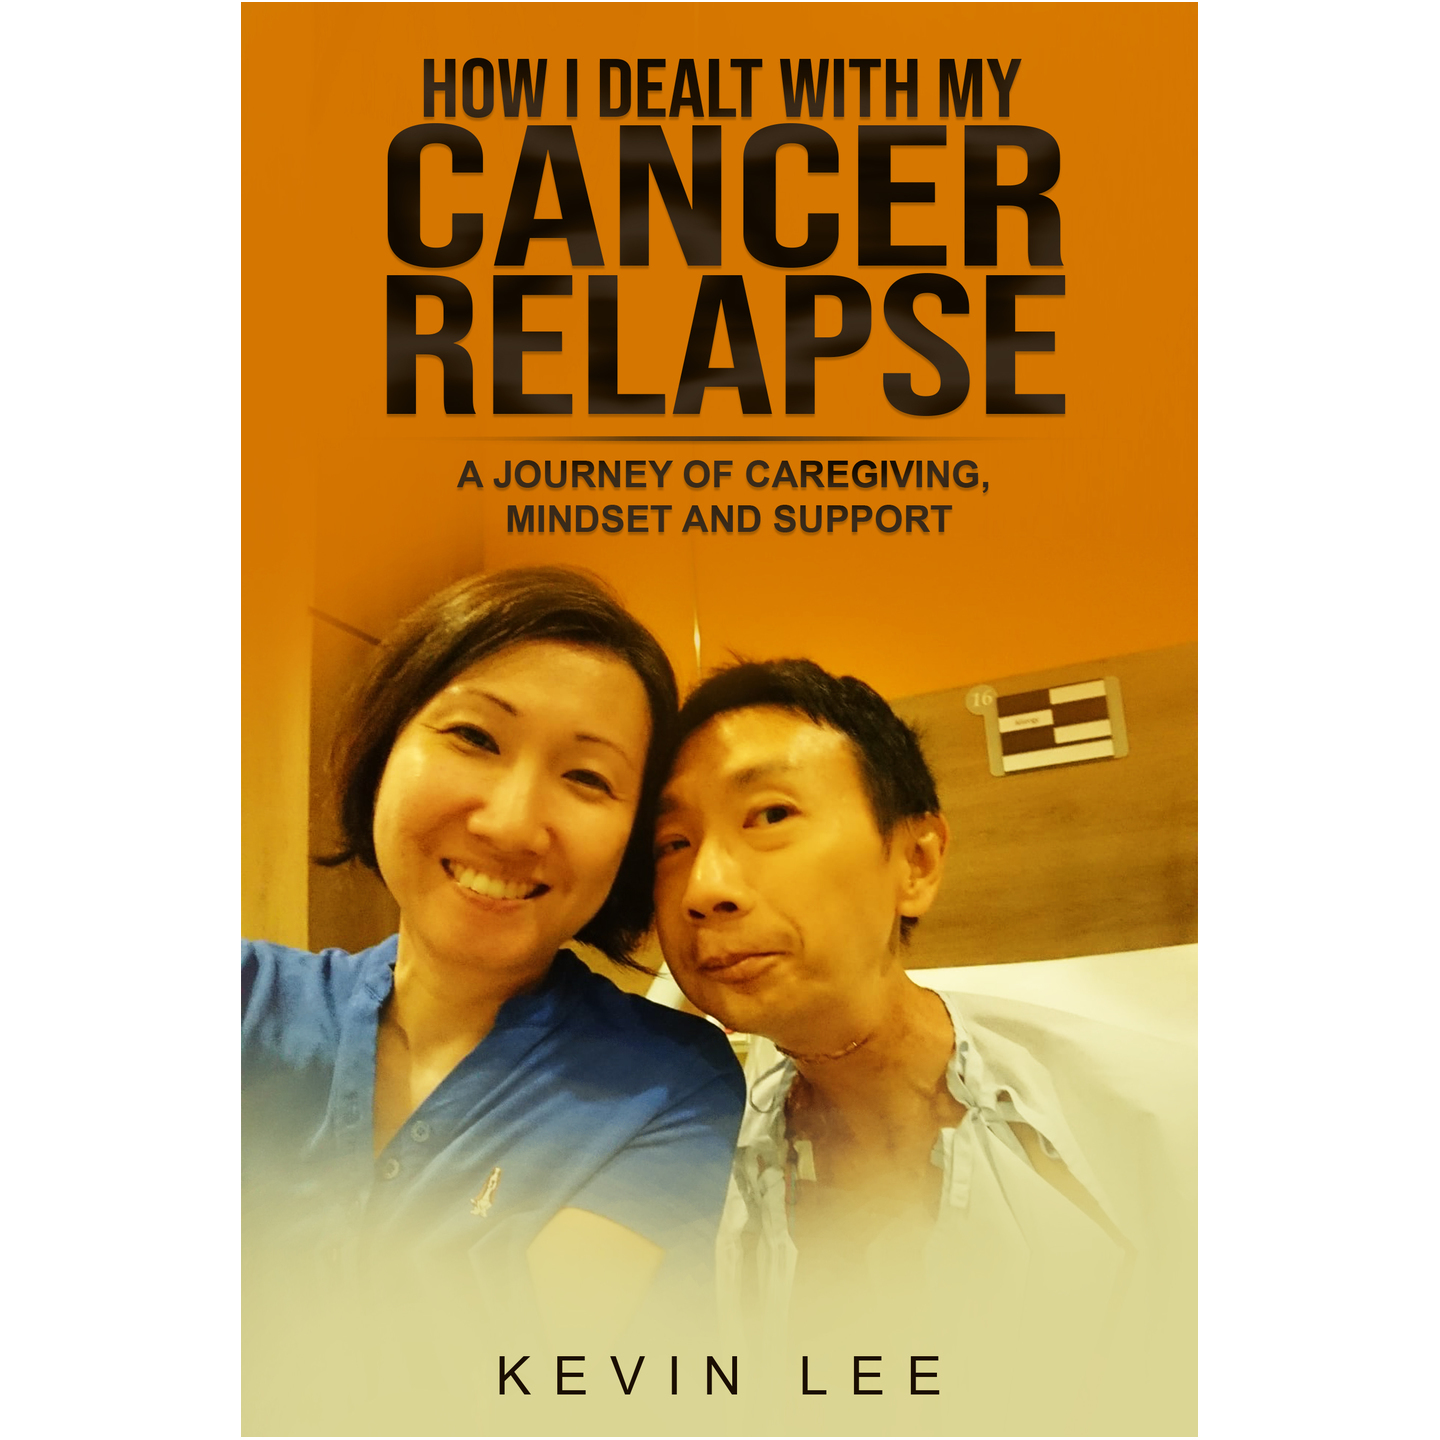 How I Dealt with My Cancer Relapse - A Journey of Caregiving, Mindset and Support